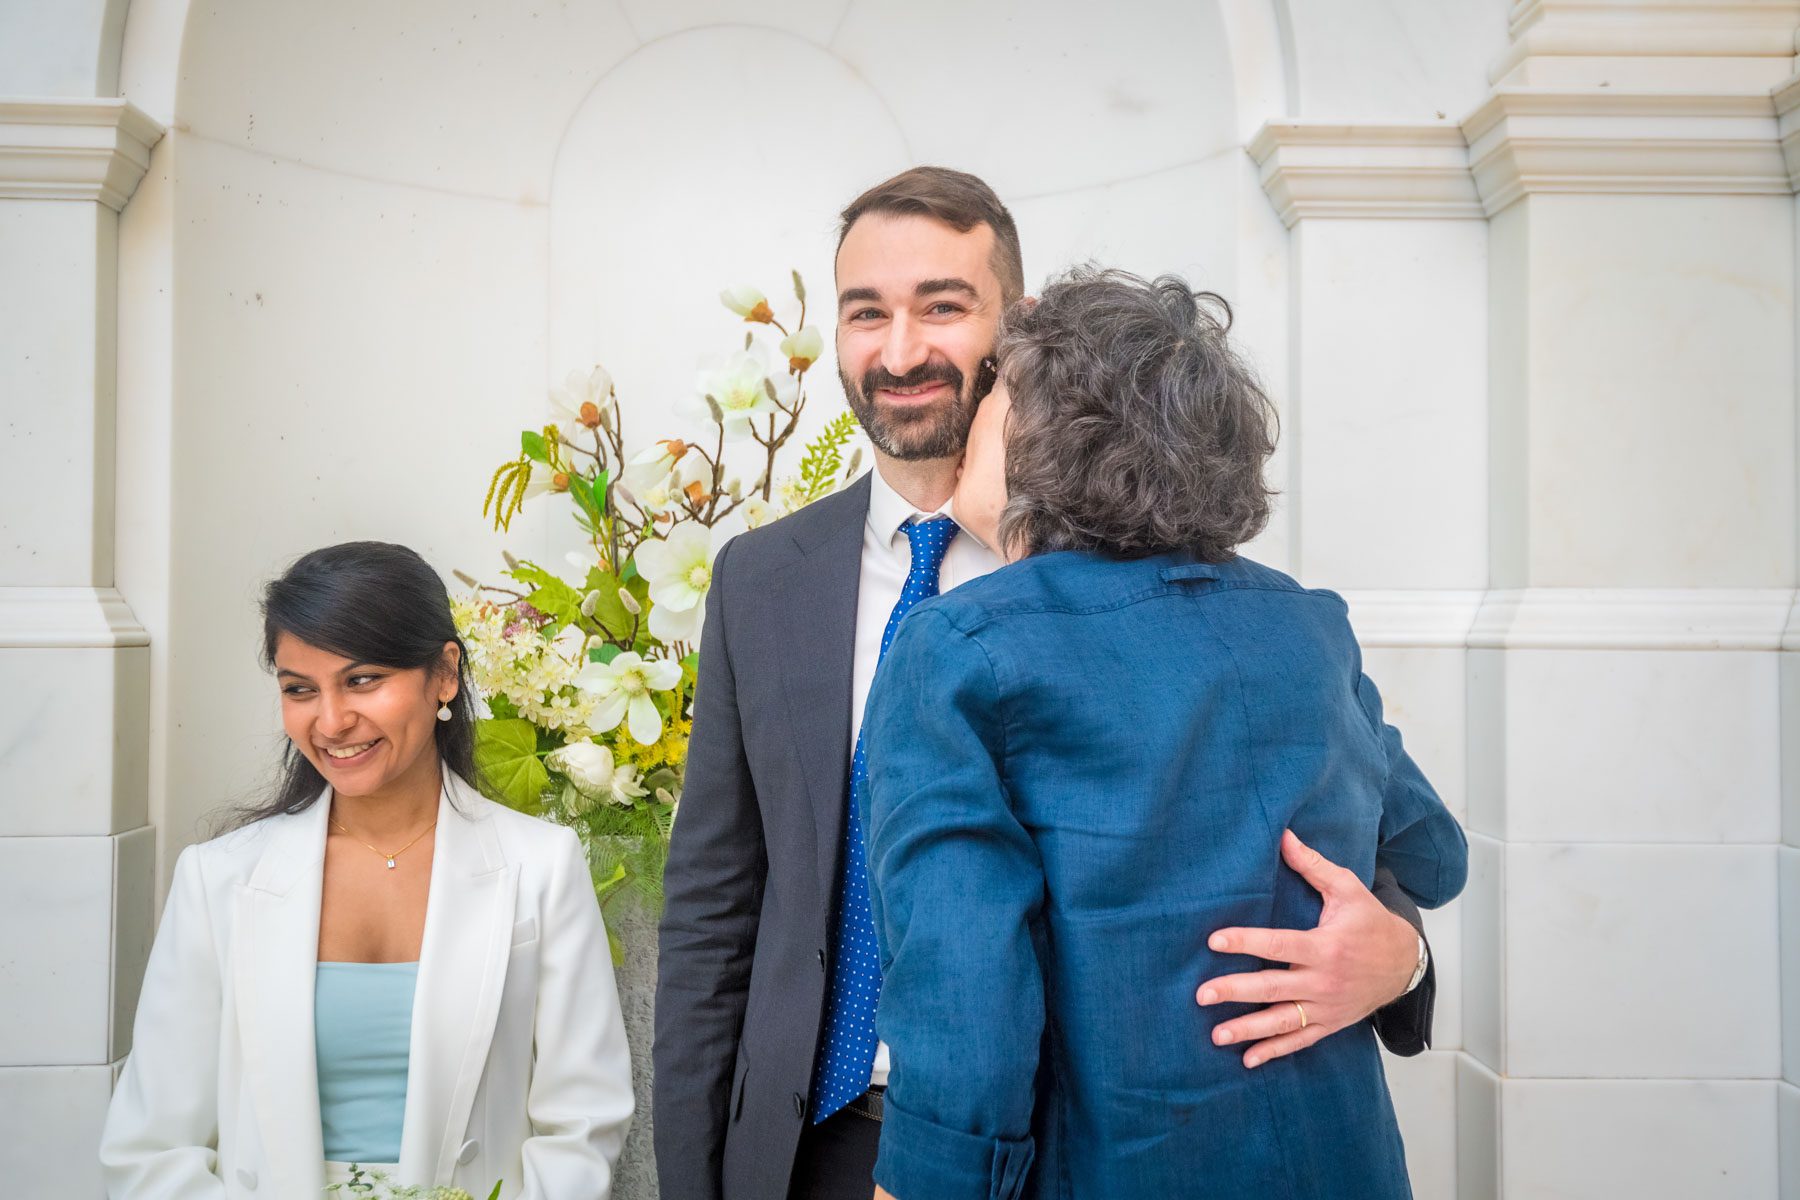 The groom grins as his mum kisses him on the cheek at a Camden Town Hall wedding